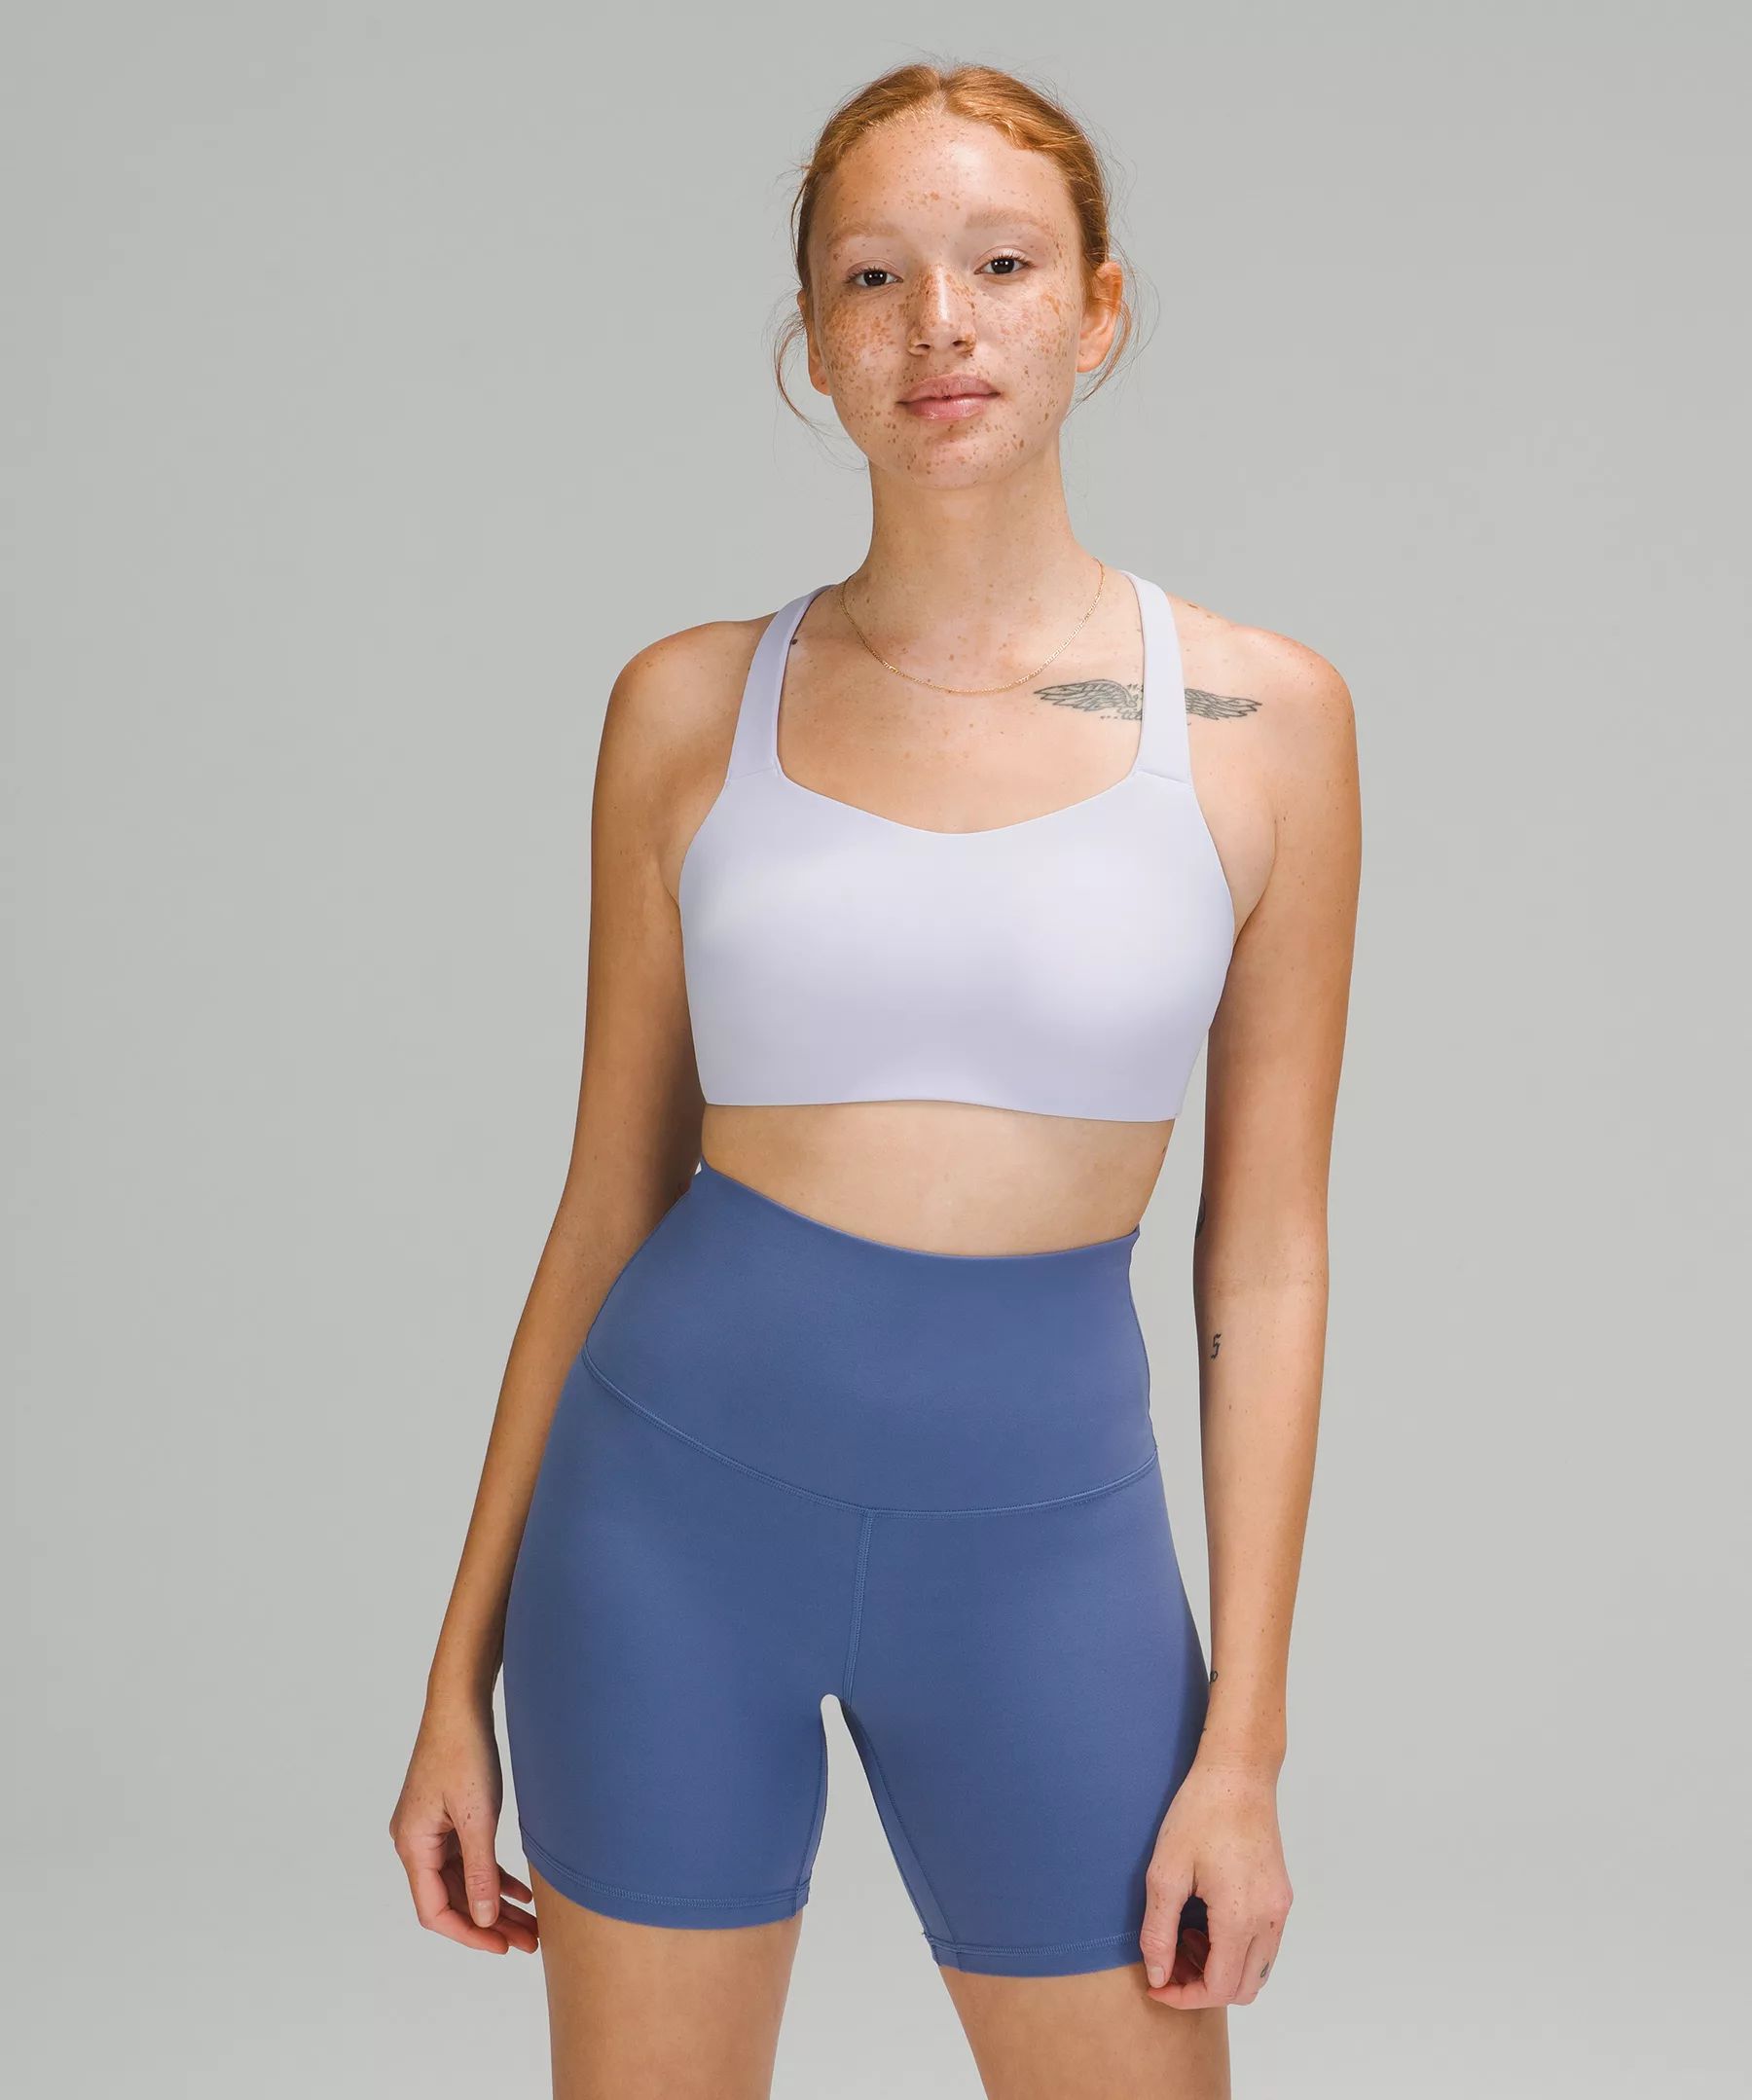 Adapt and Align BraLight Support, C–E Cups | Lululemon (US)